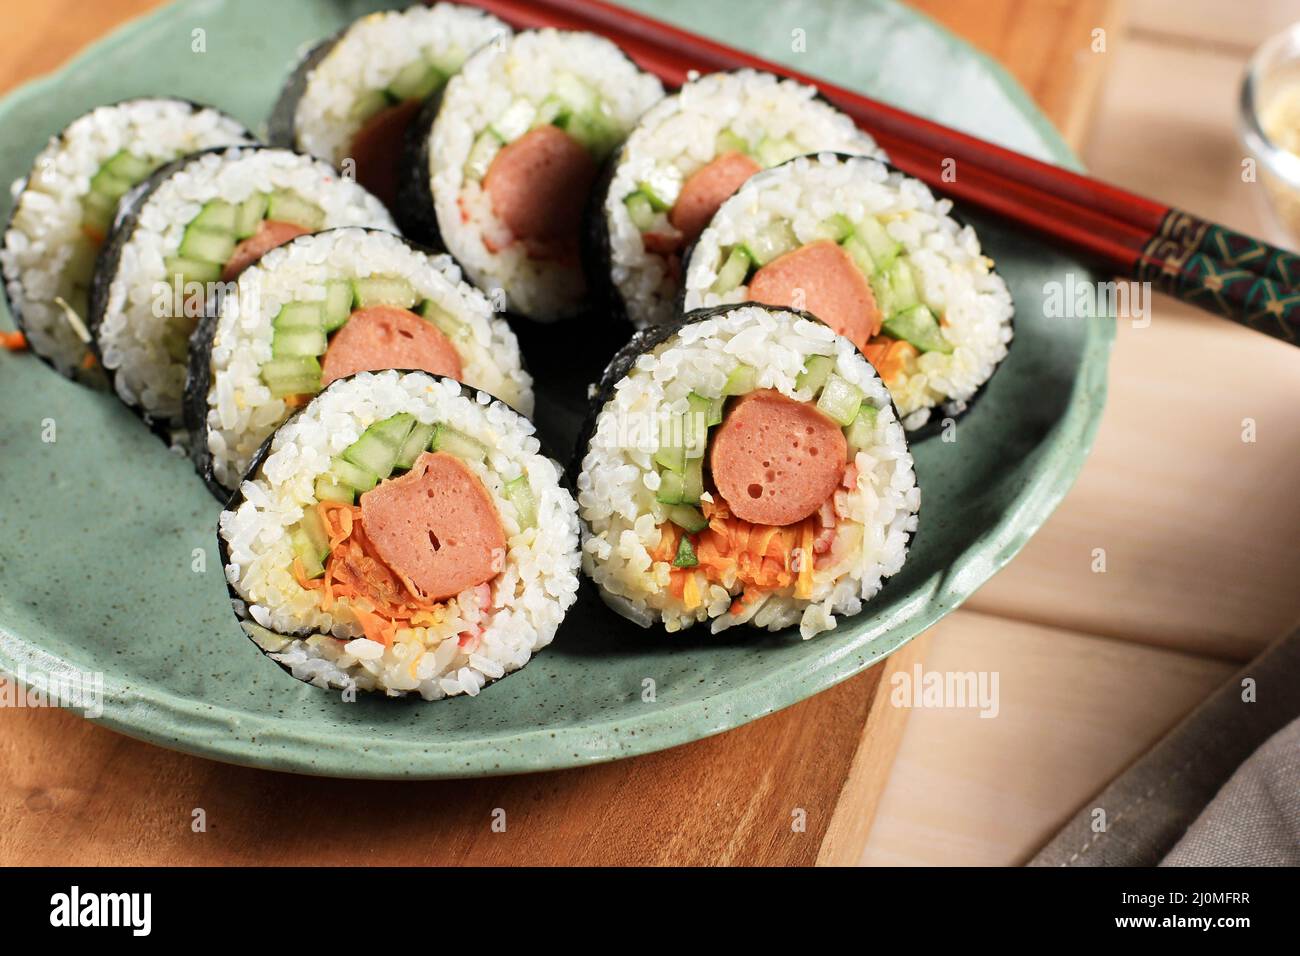 Korean Roll Gimbap or Kimbob Made from Steamed White Rice (Bap) and Various Other Ingredients, Close Up Stock Photo